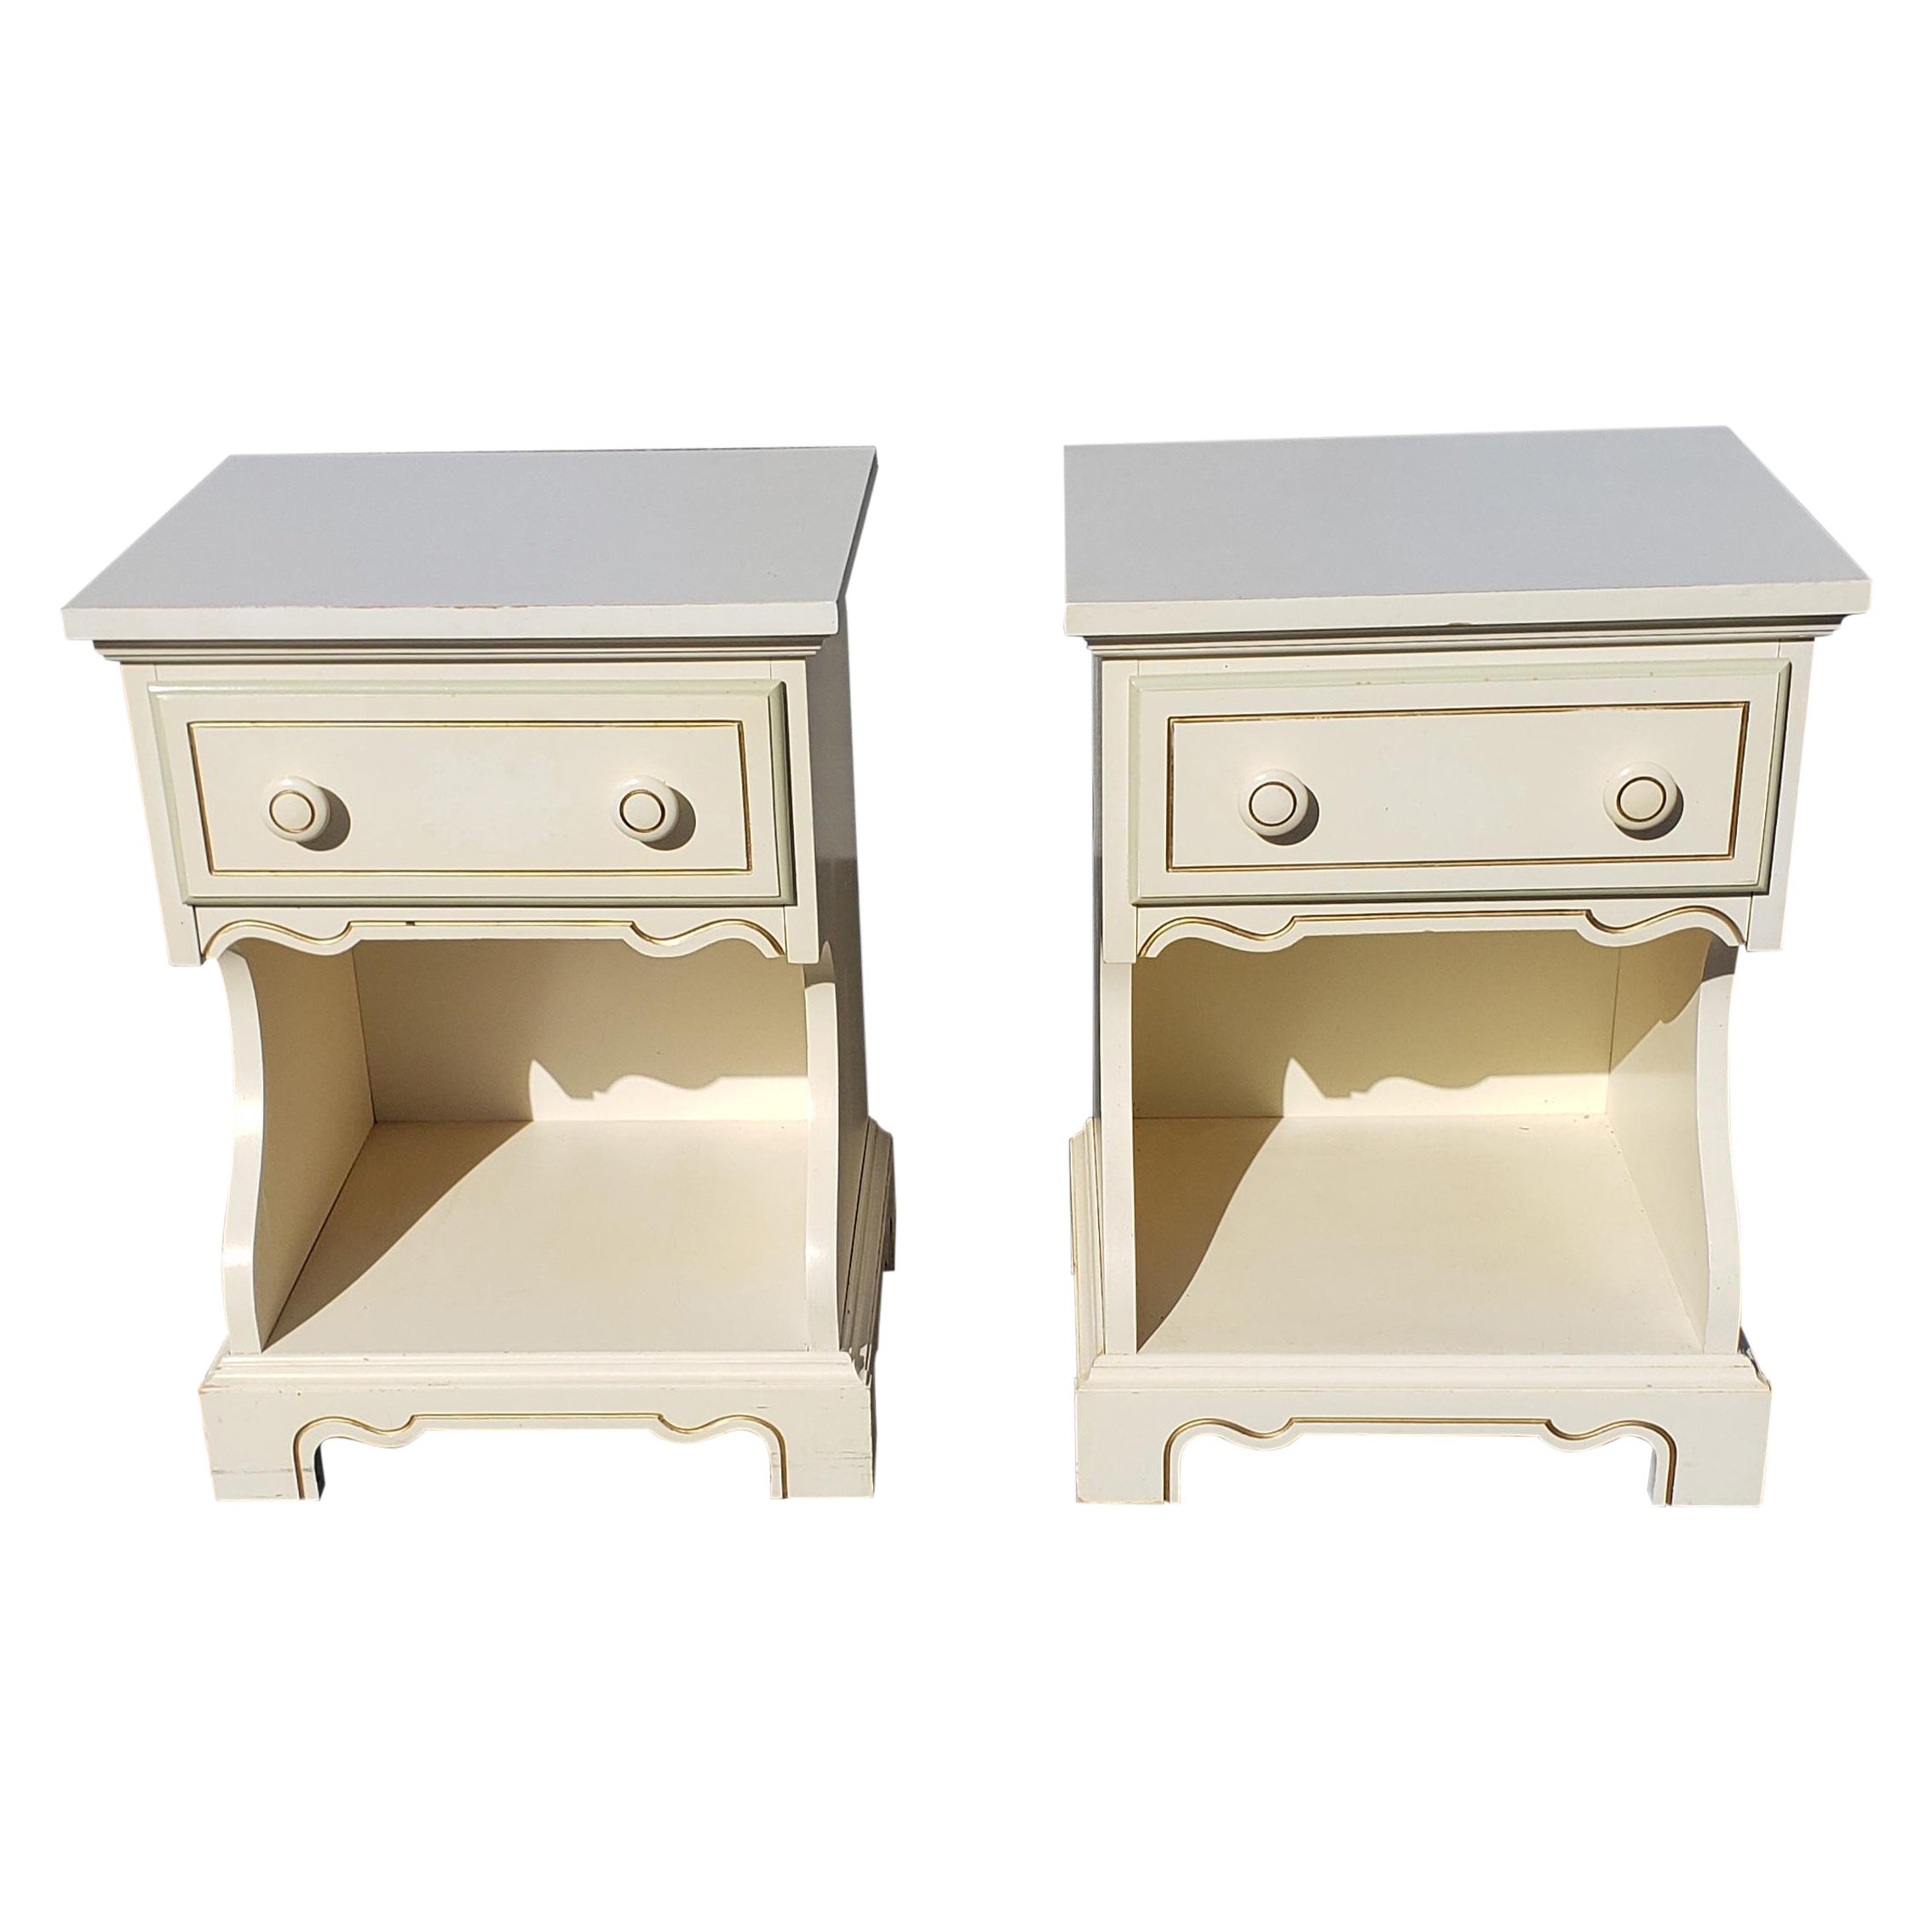 Pair of Midcentury Dixie Furniture Single Drawer Side Tables